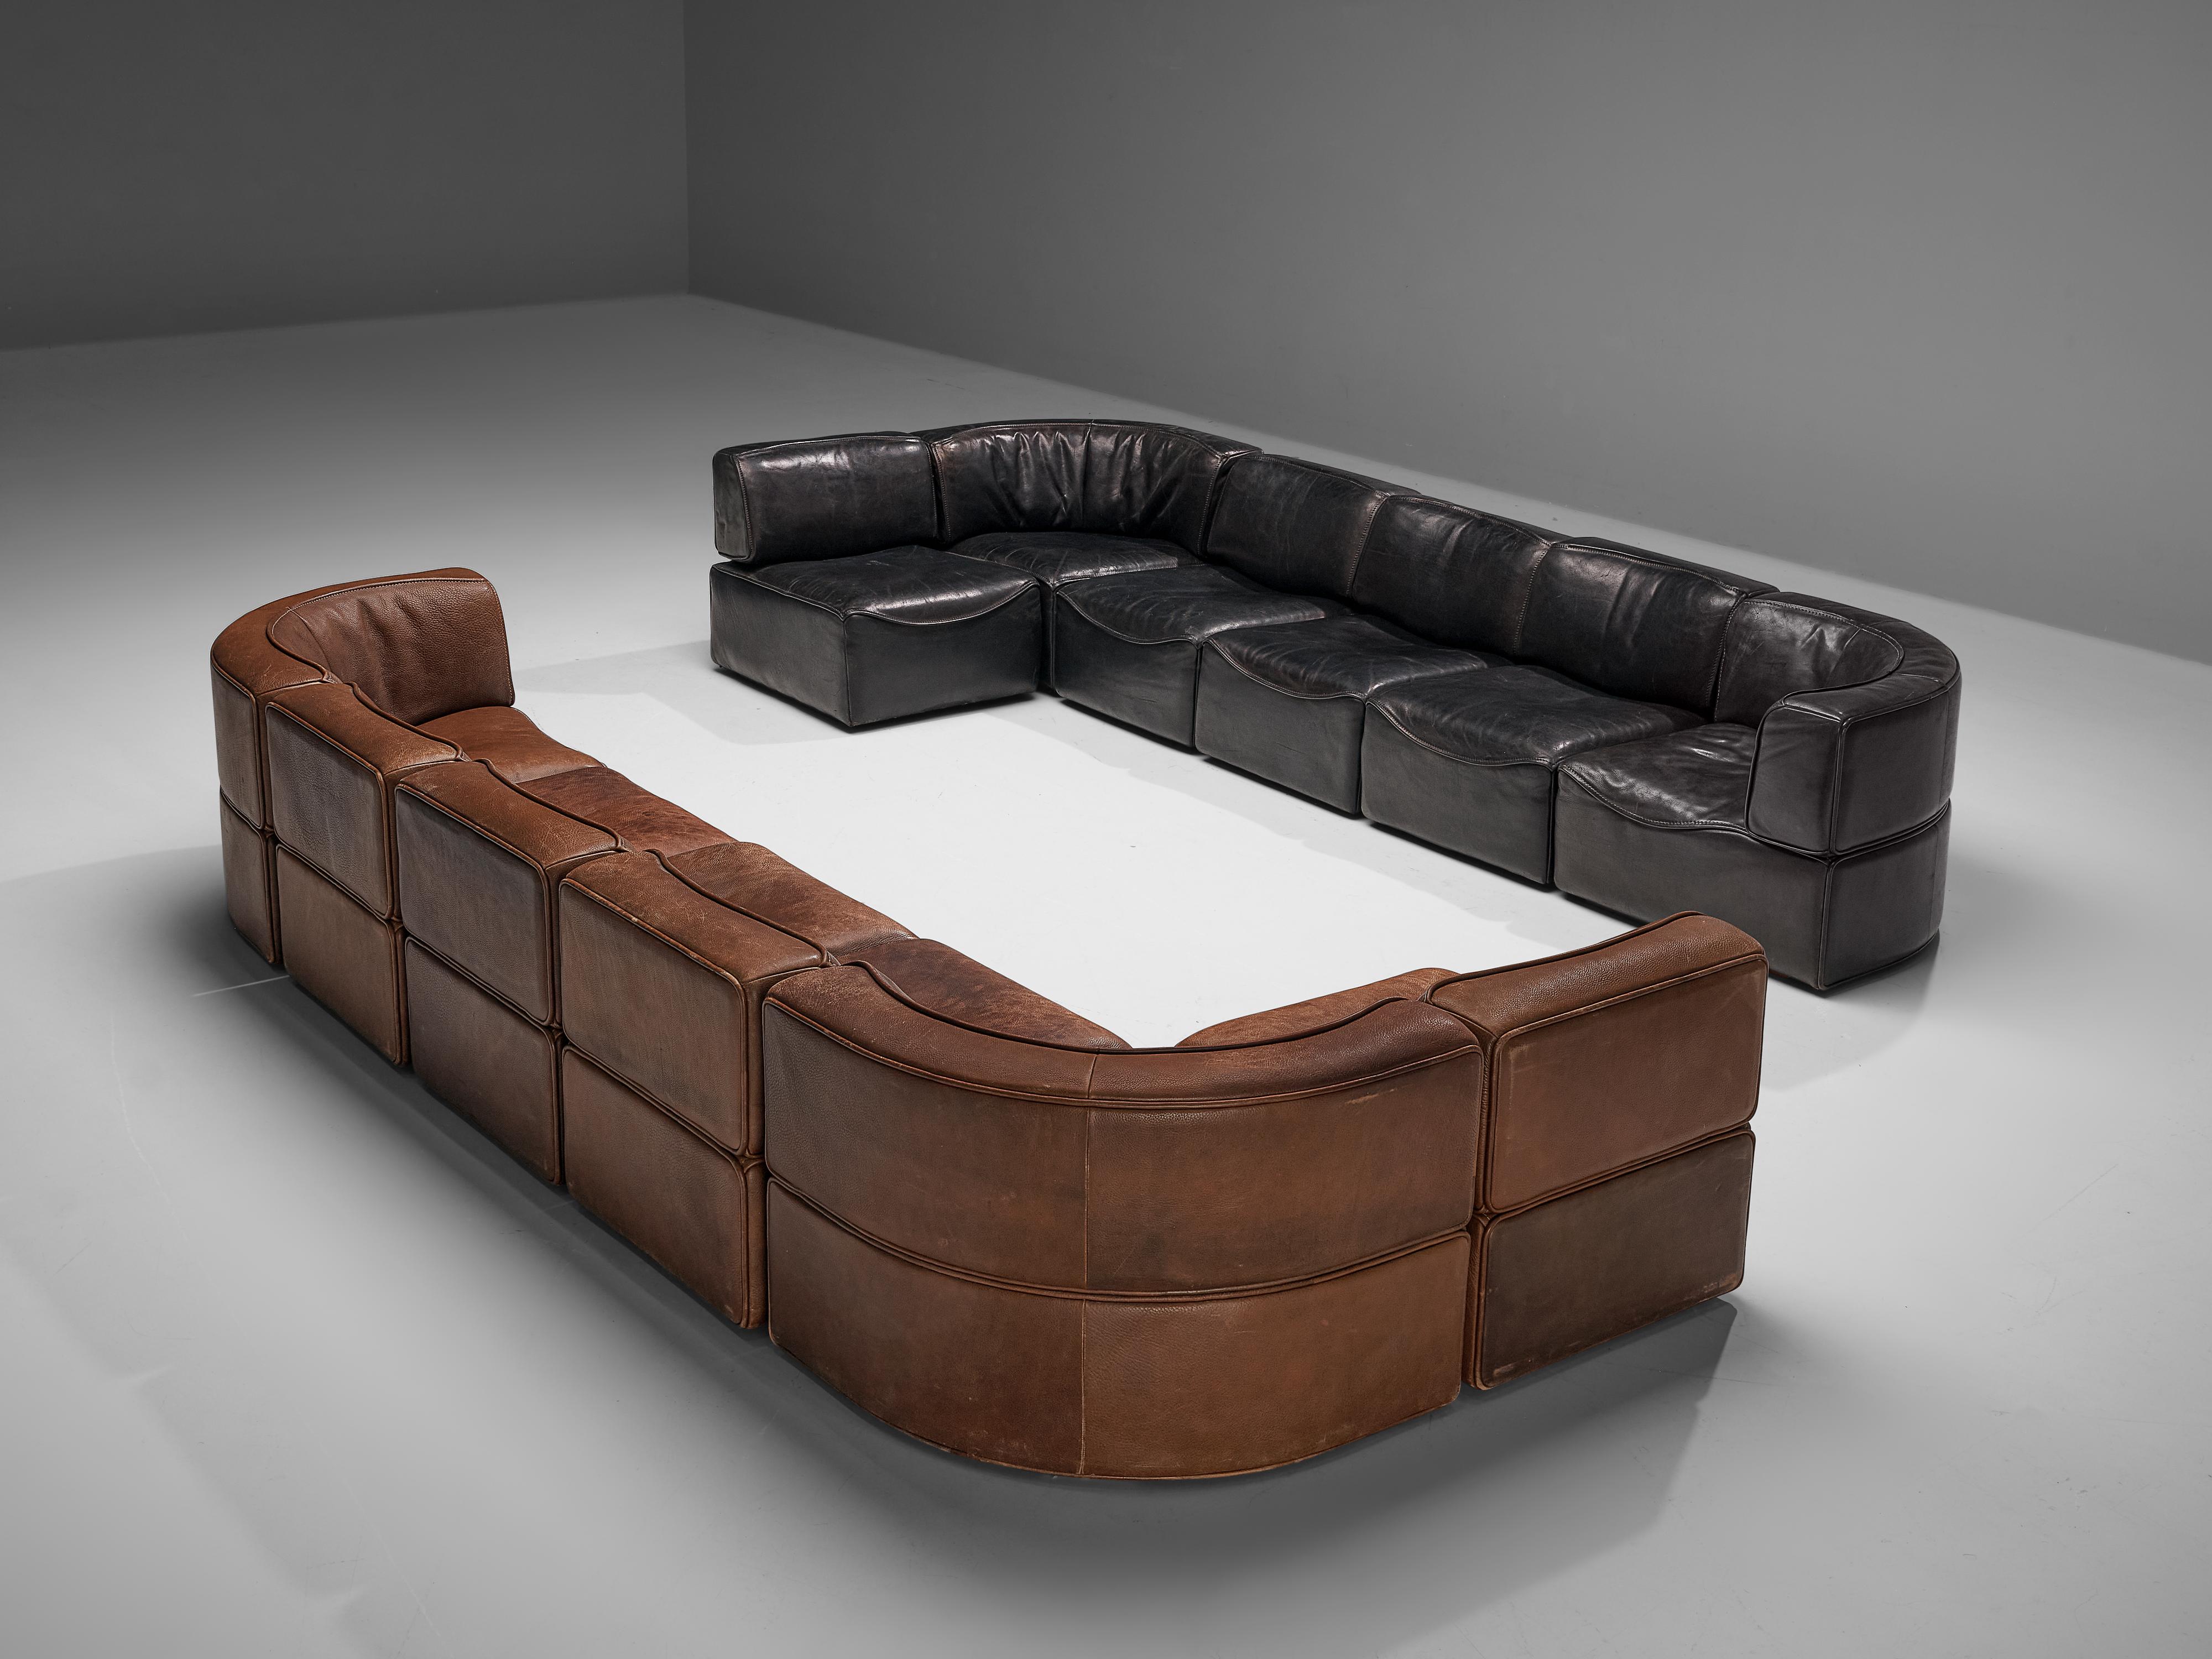 De Sede, pair of sectional sofas model DS-15, leather, Switzerland, 1970s.

These high quality sectional sofas designed by DeSede in the 1970s contain both one corner element and four normal elements, which makes it possible to arrange these sofas